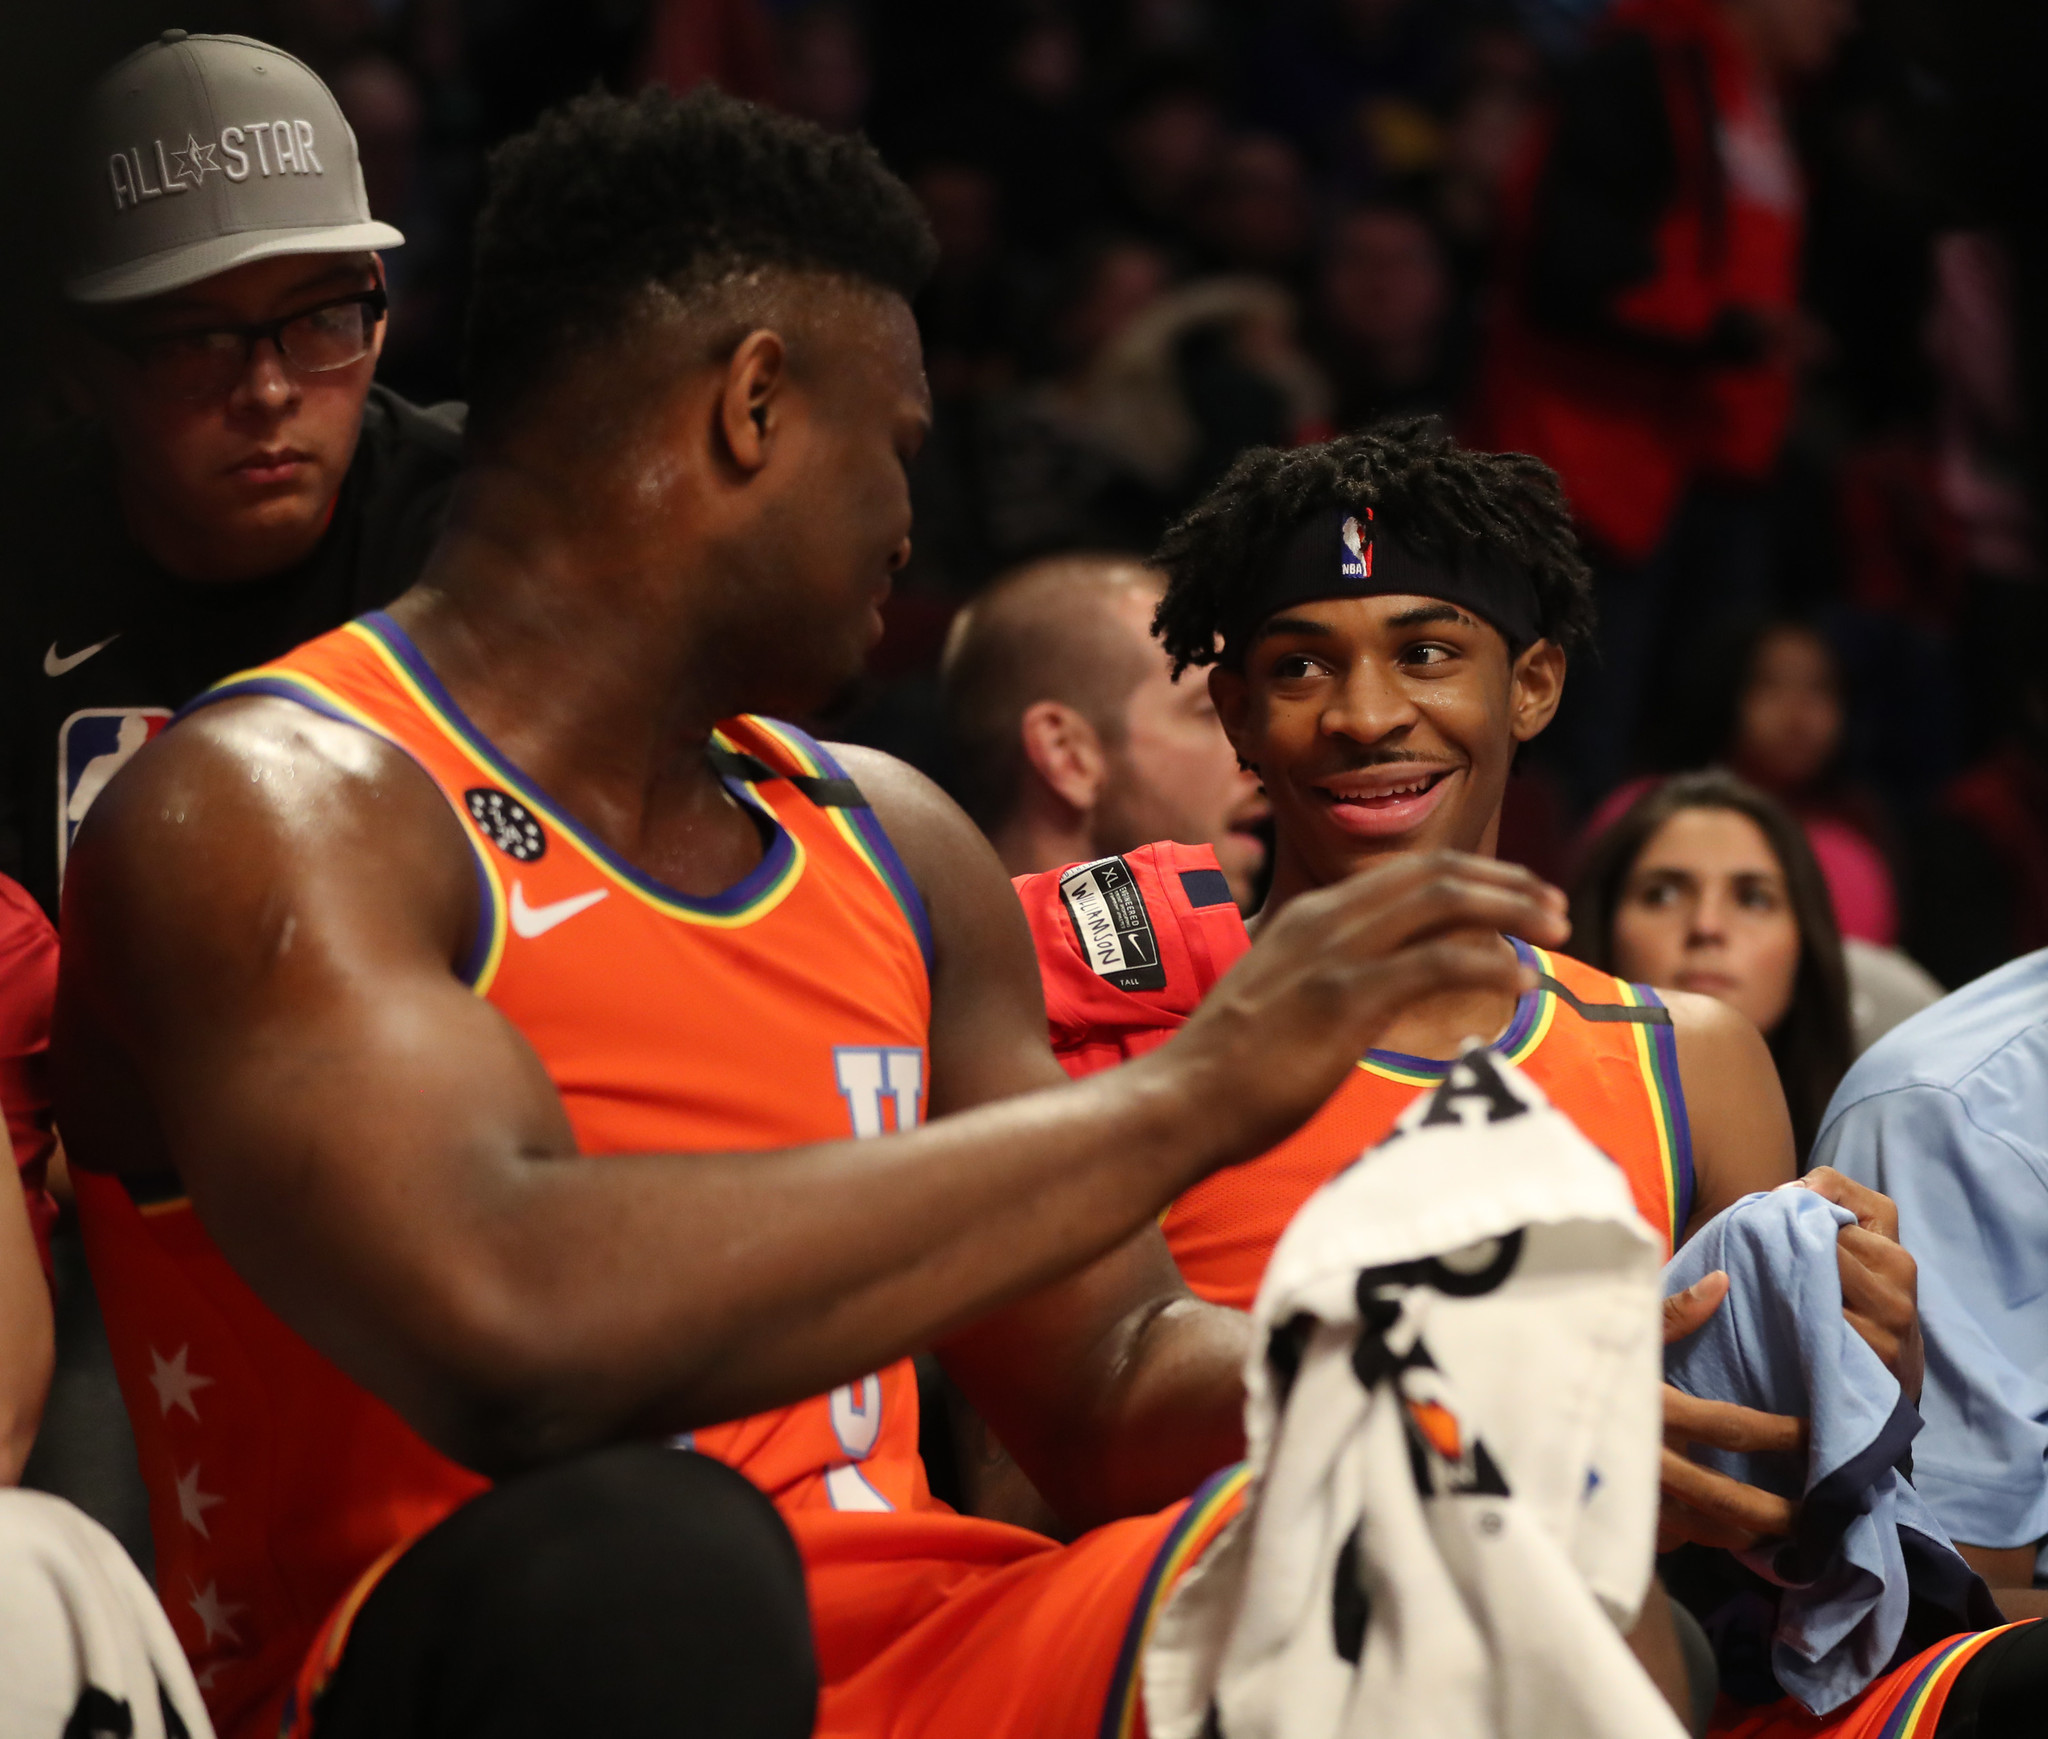 2019 All-Star Weekend, Kemba and Miles All-Star Saturday Night - 2/16/19  Photo Gallery